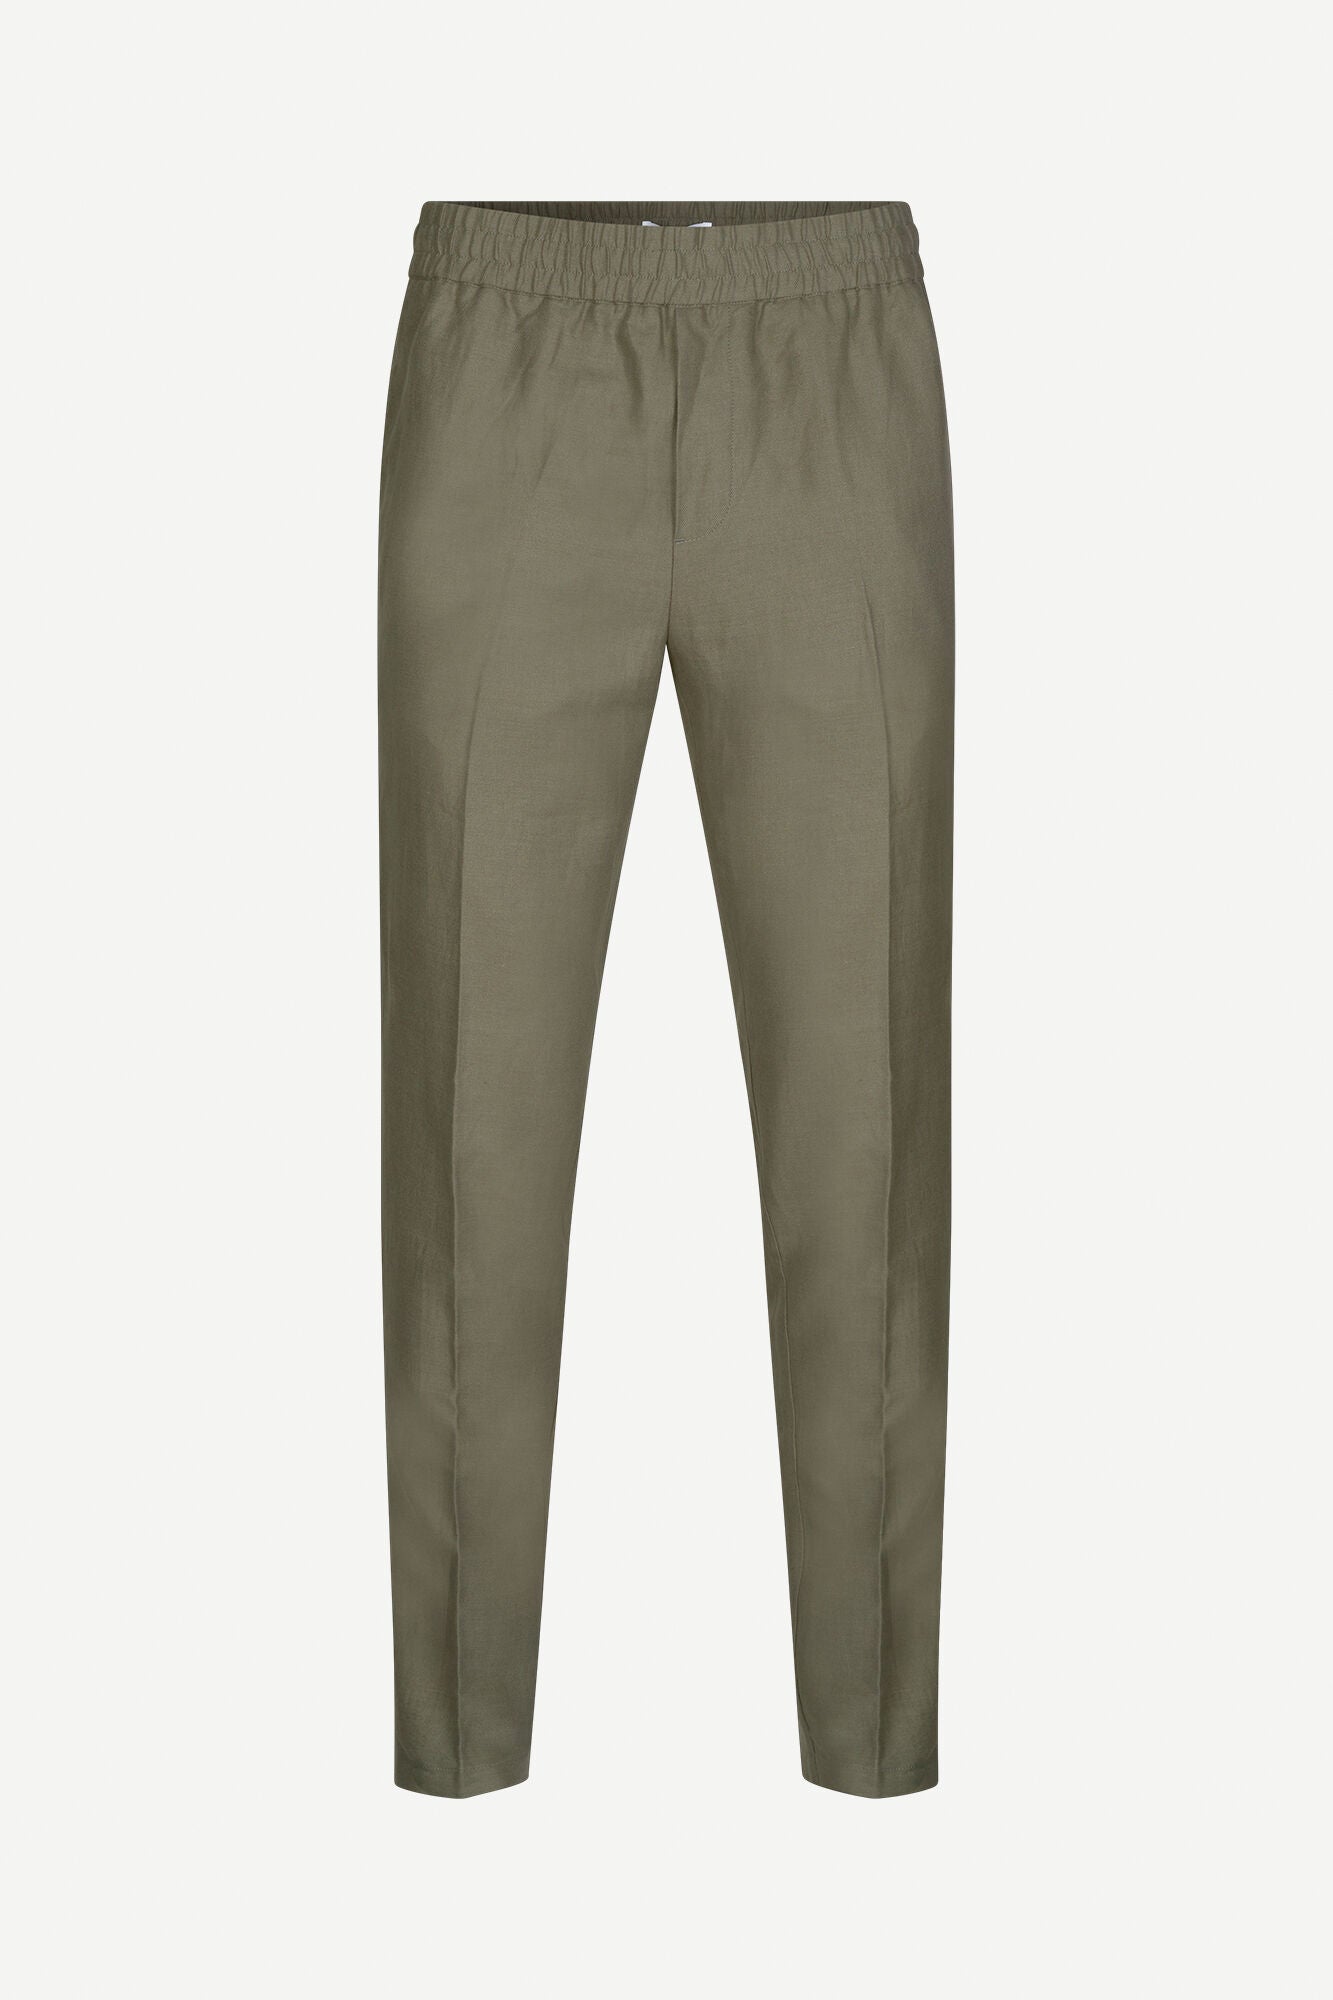 SMITHY TROUSERS